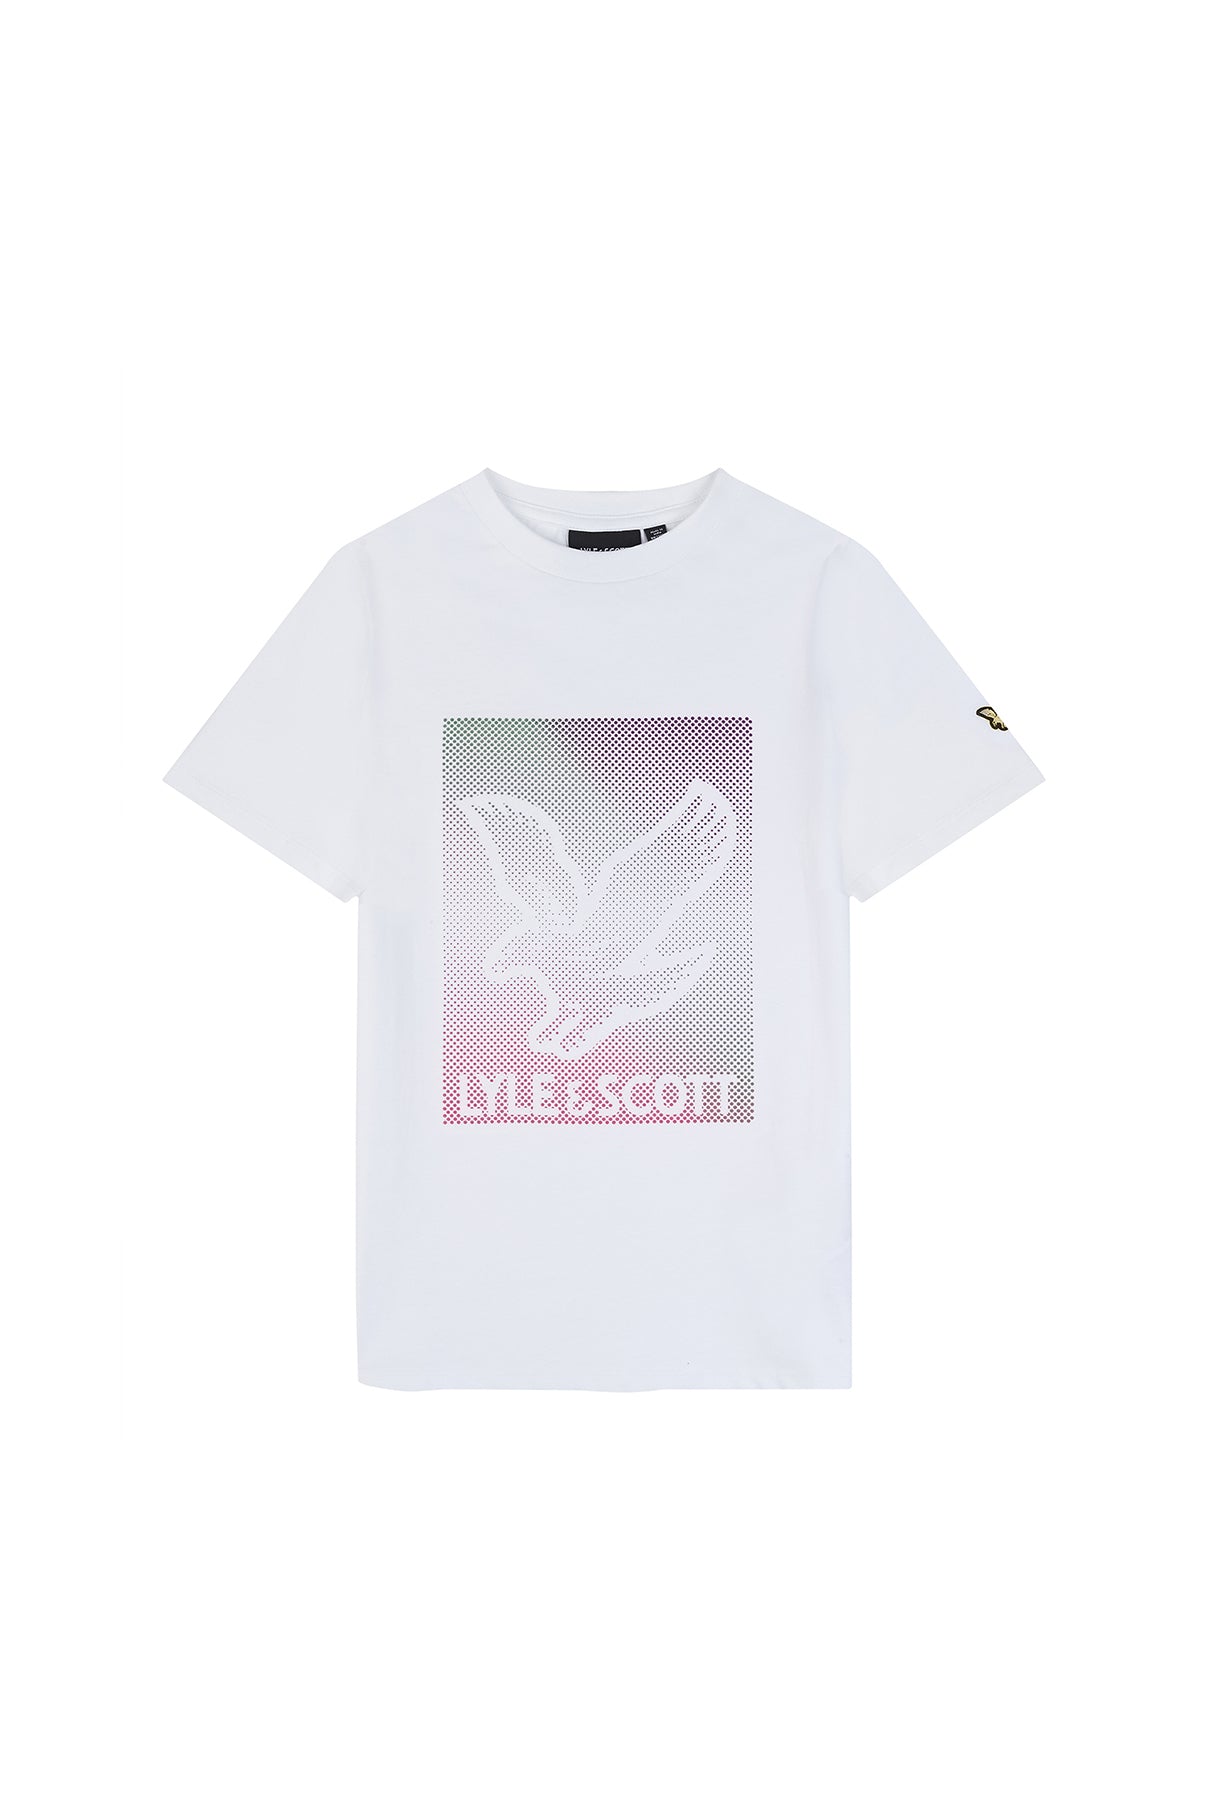 Lyle & Scott Limited T-shirt Dotted Eagle